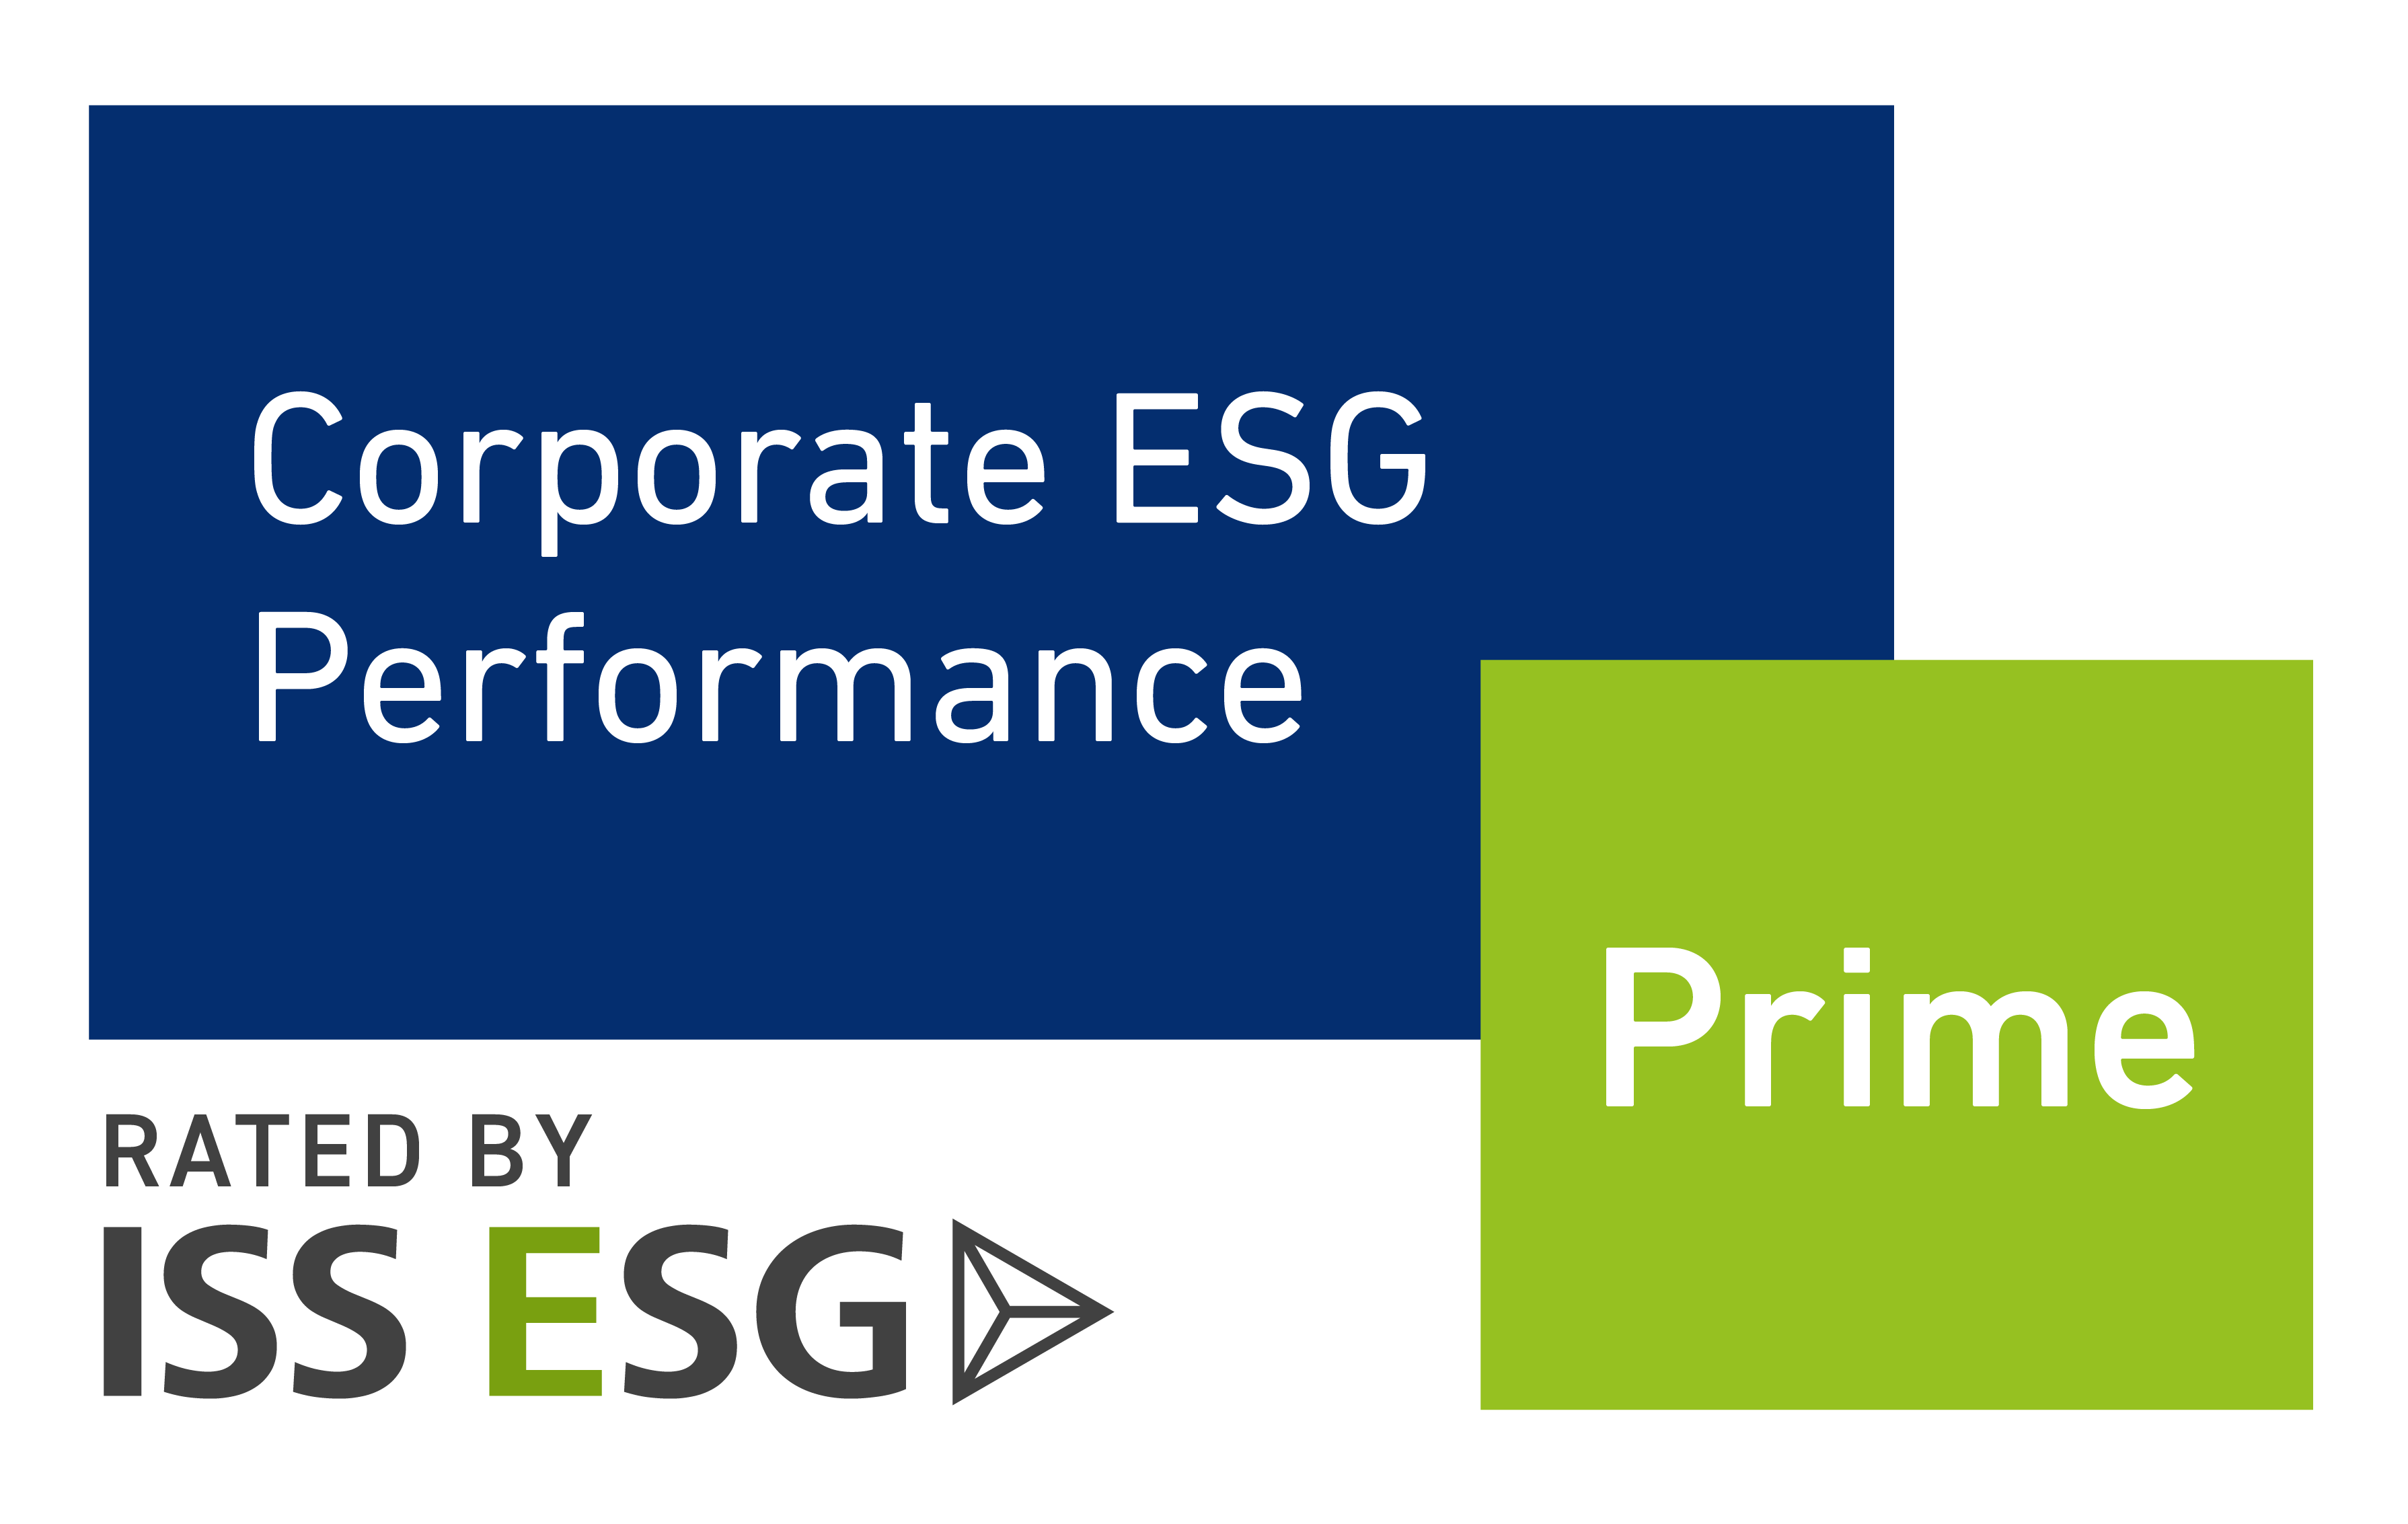 Logo showing actions by Recruit Holdings and its group companies received Prime ESG ratings from ISS.